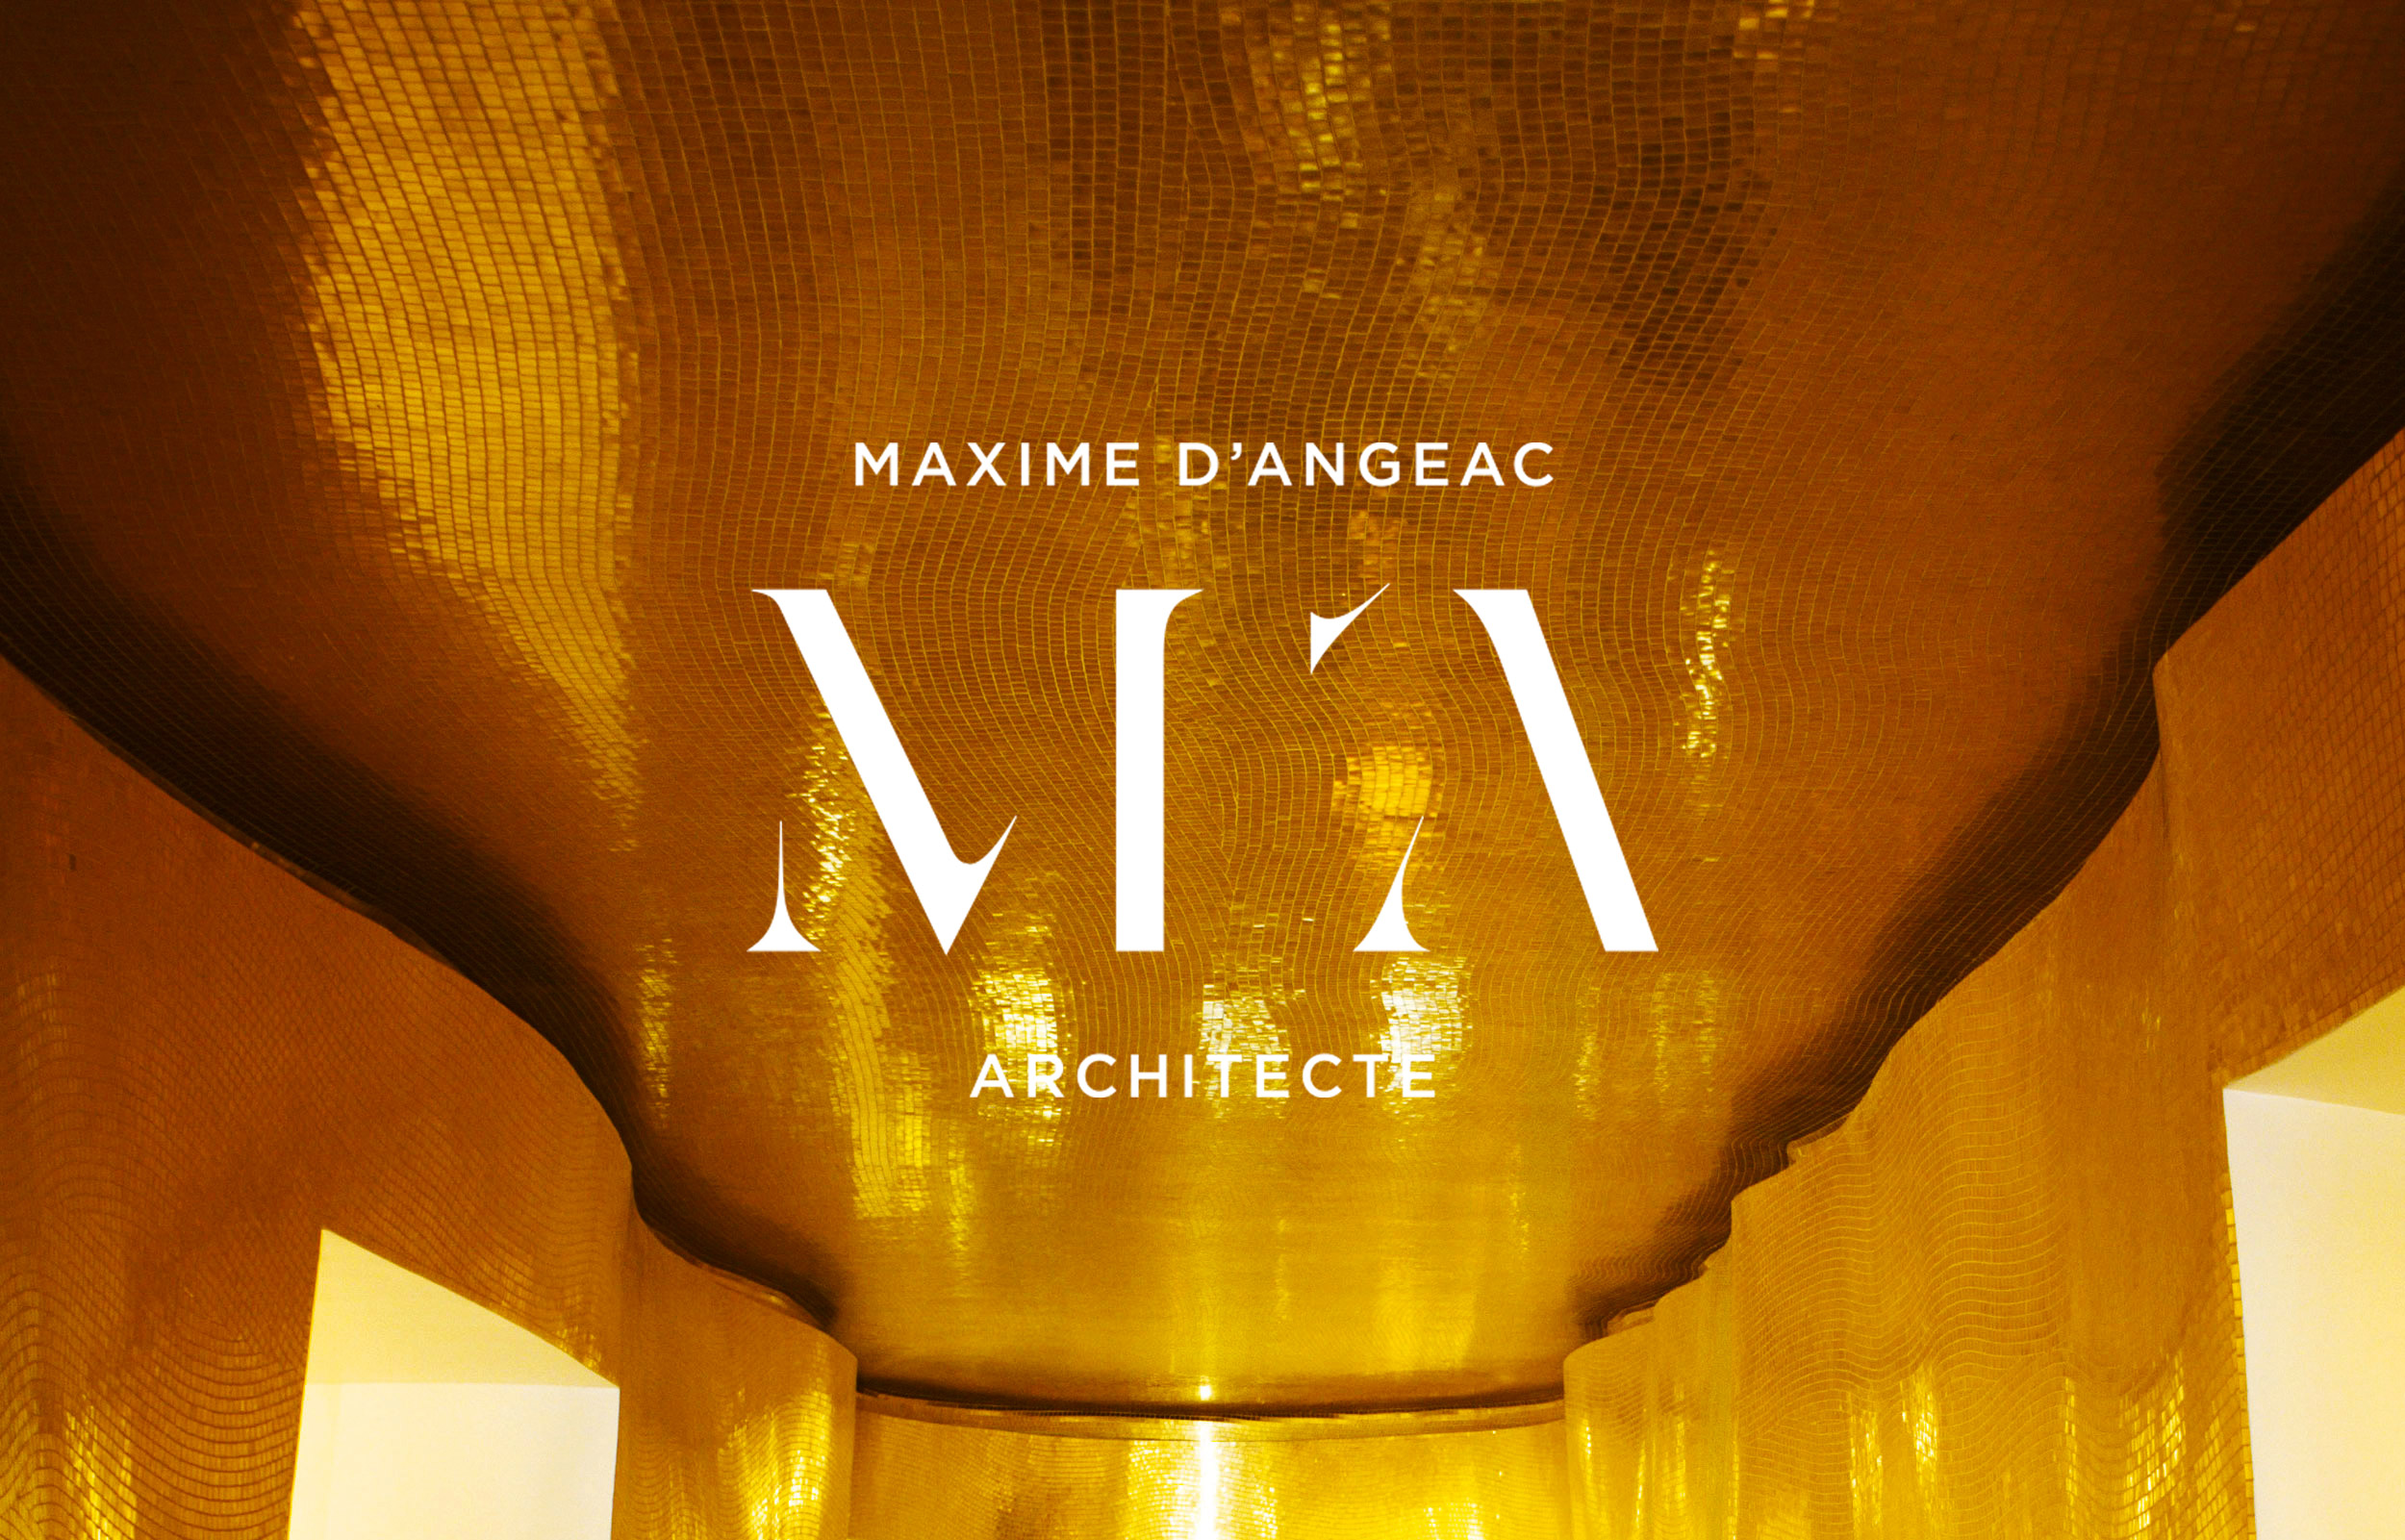 Logo of the architect Maxime d’Angeac